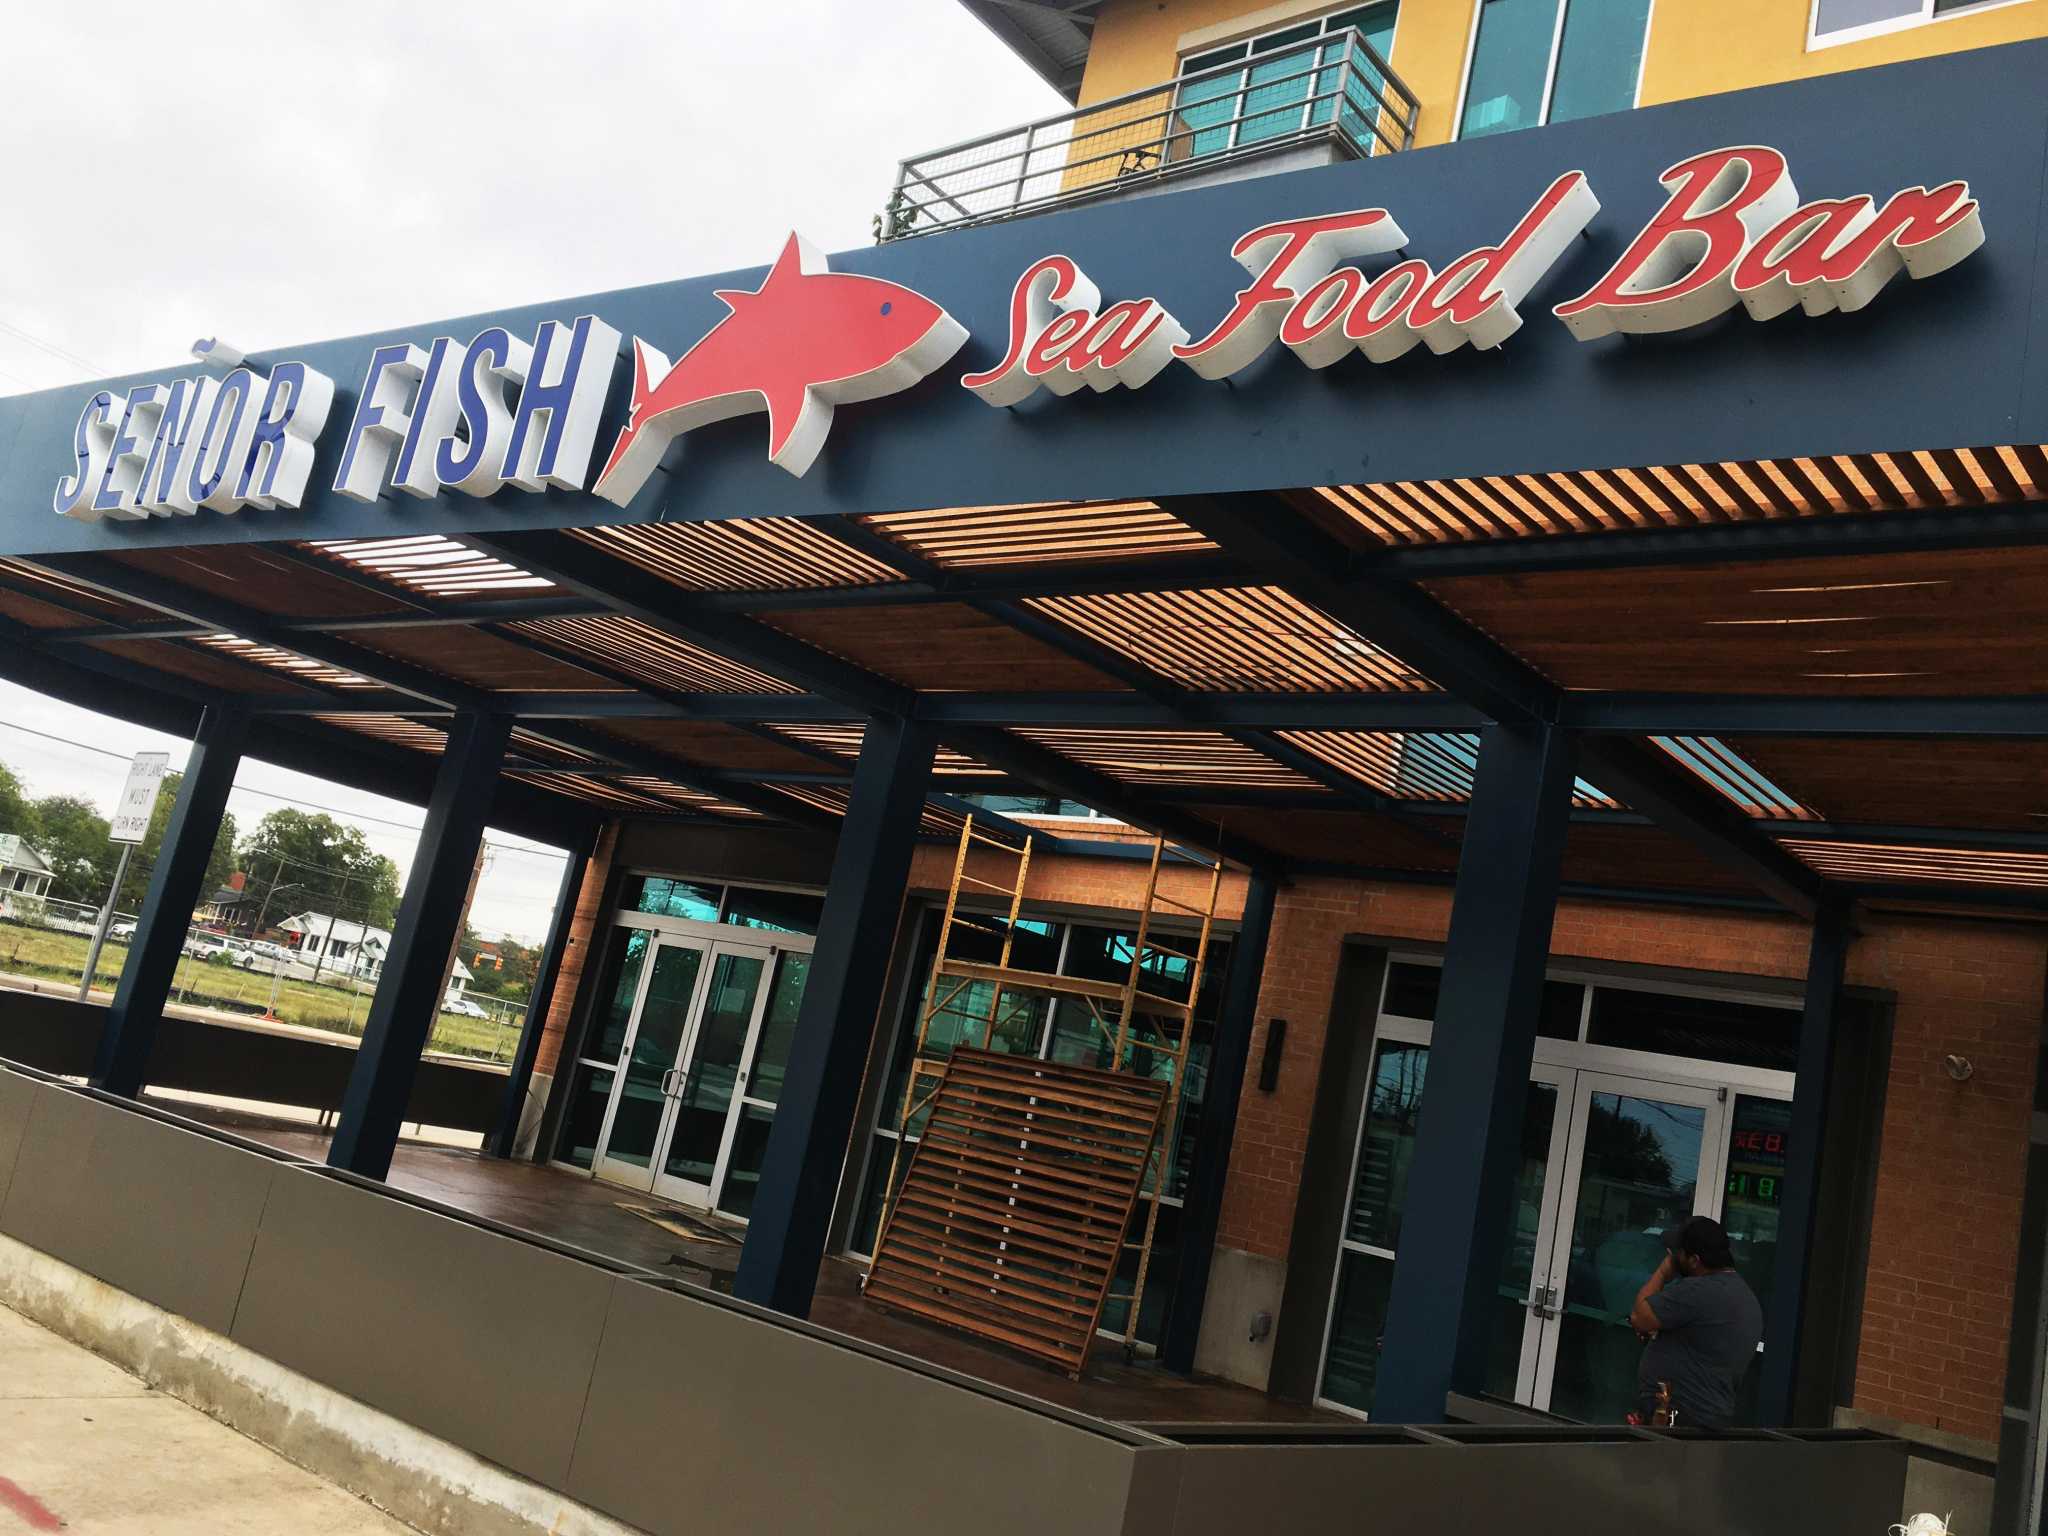 Señor Fish Seafood Bar restaurant to open in old Tacos and Tequila by Pearl